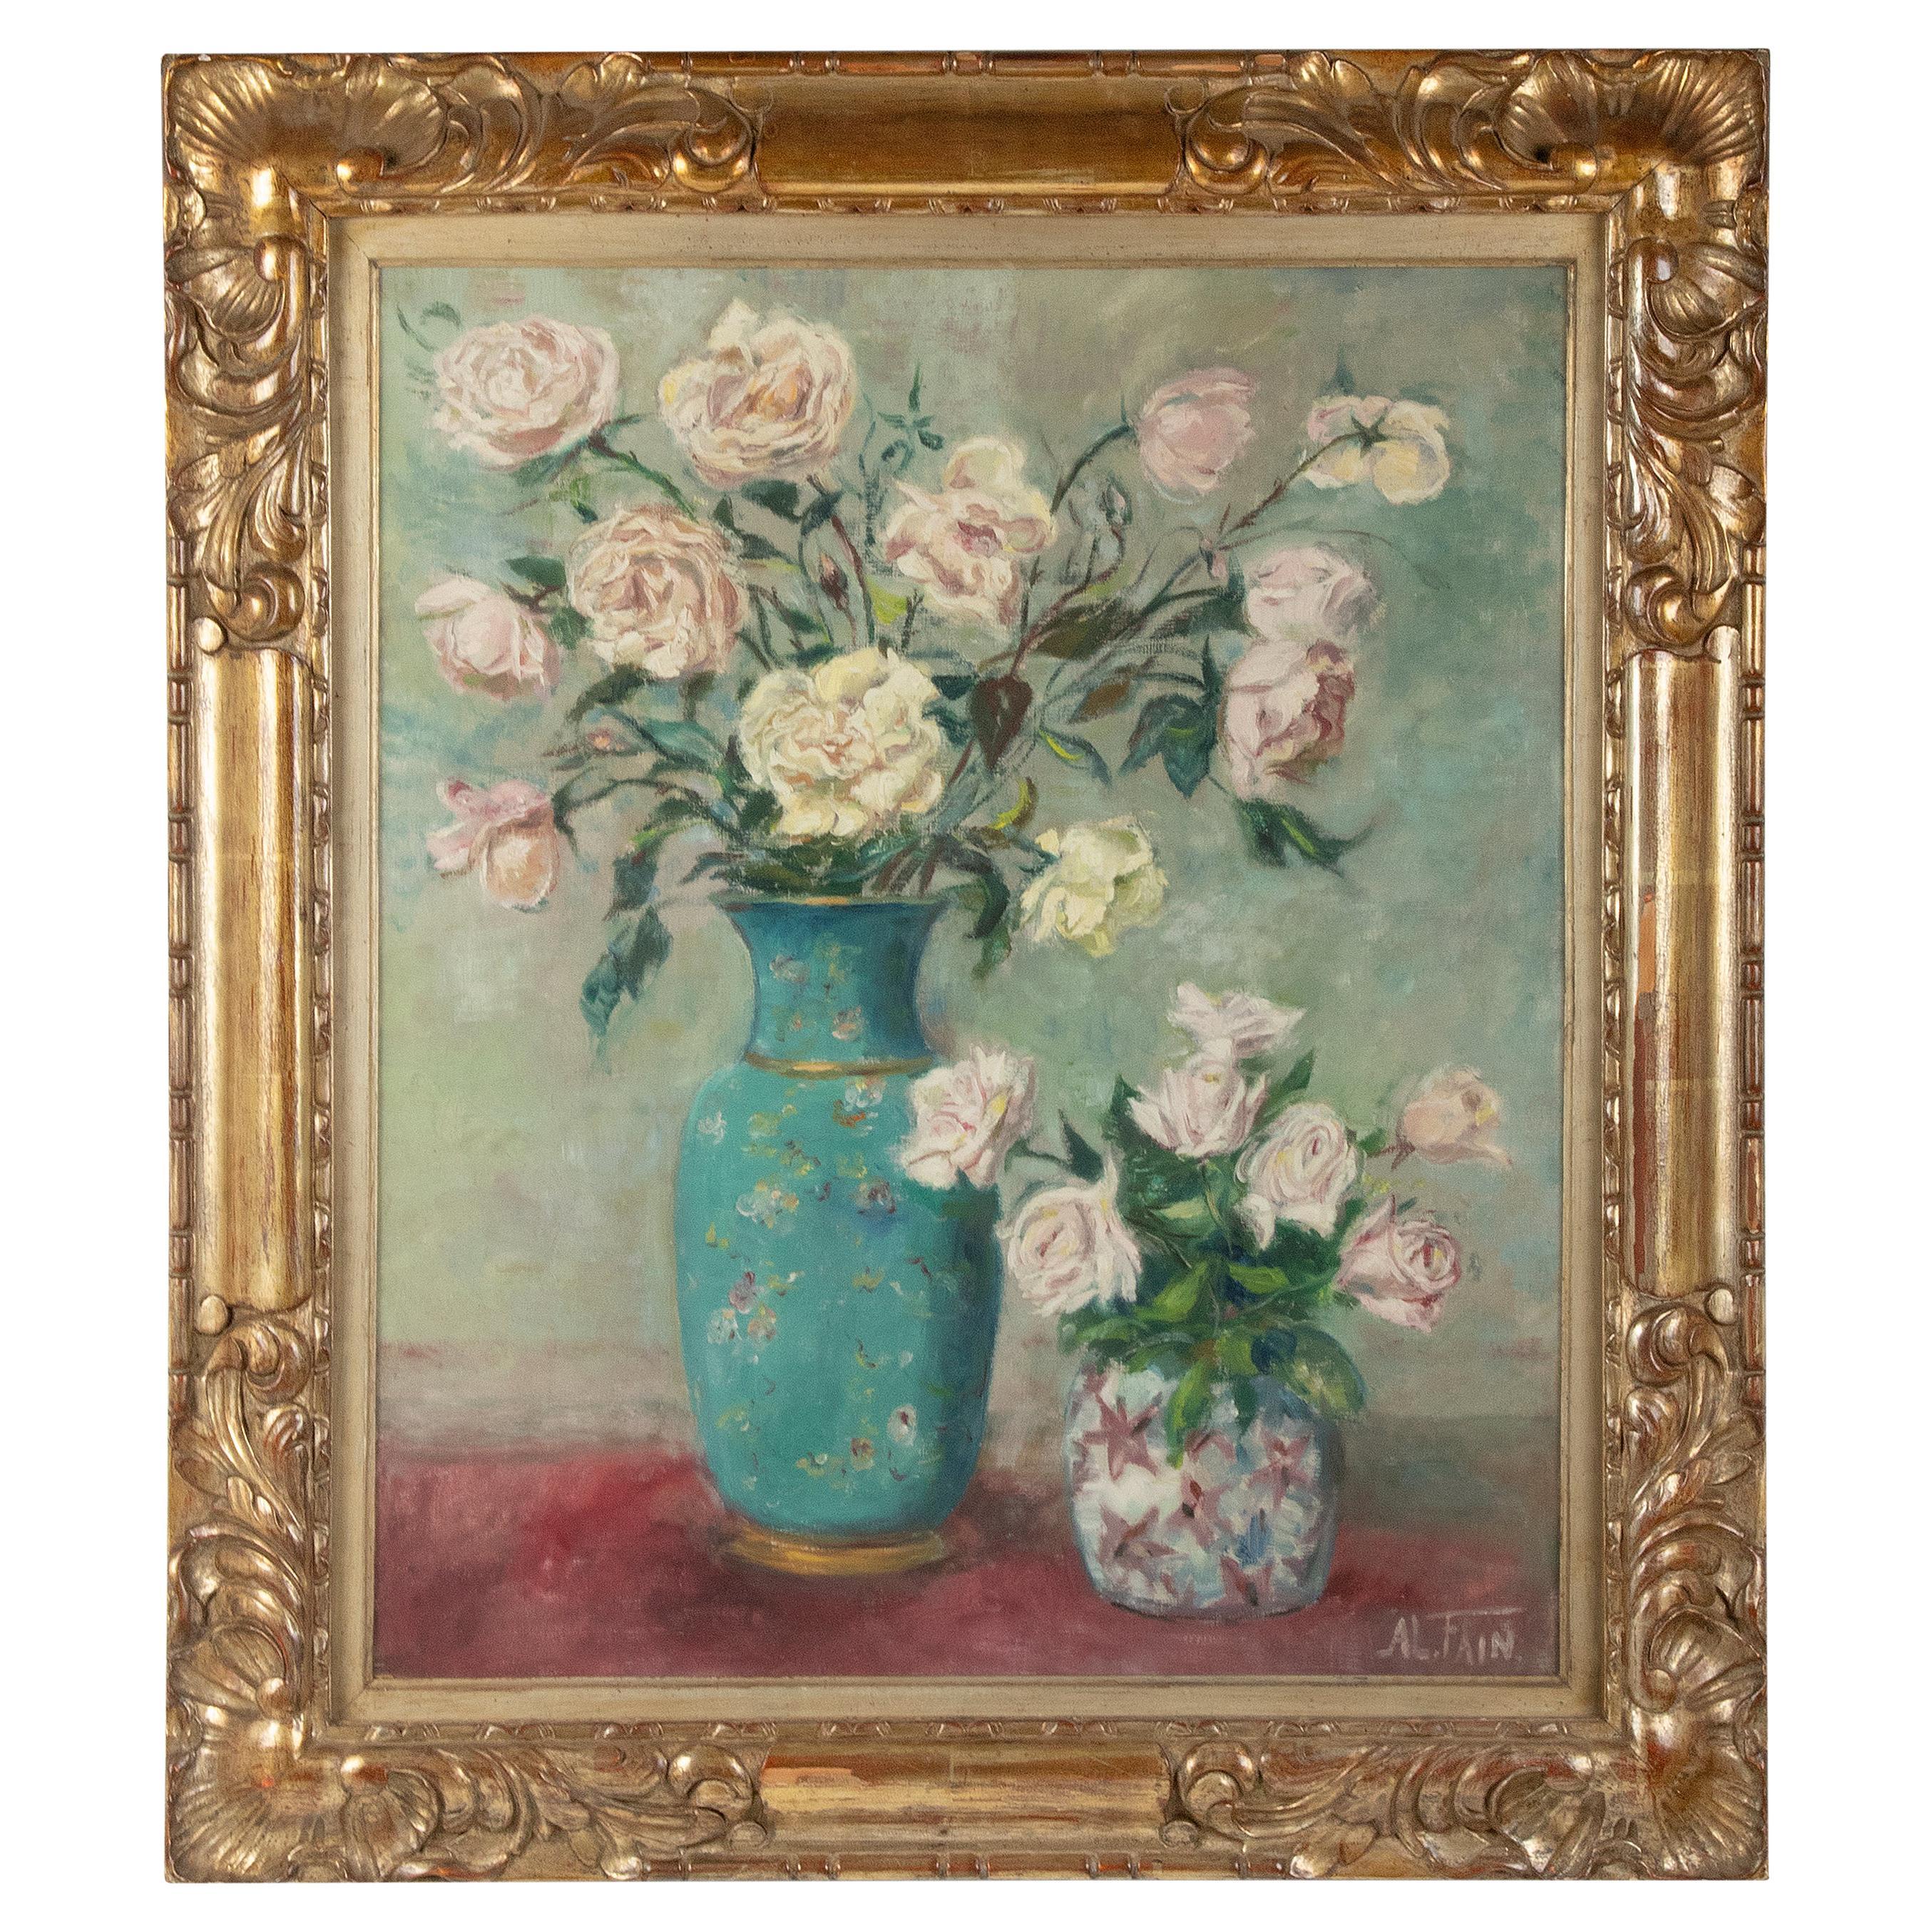 Early 20th Century Oil Painting Impressionistic Flower Still Life by Al. Fain